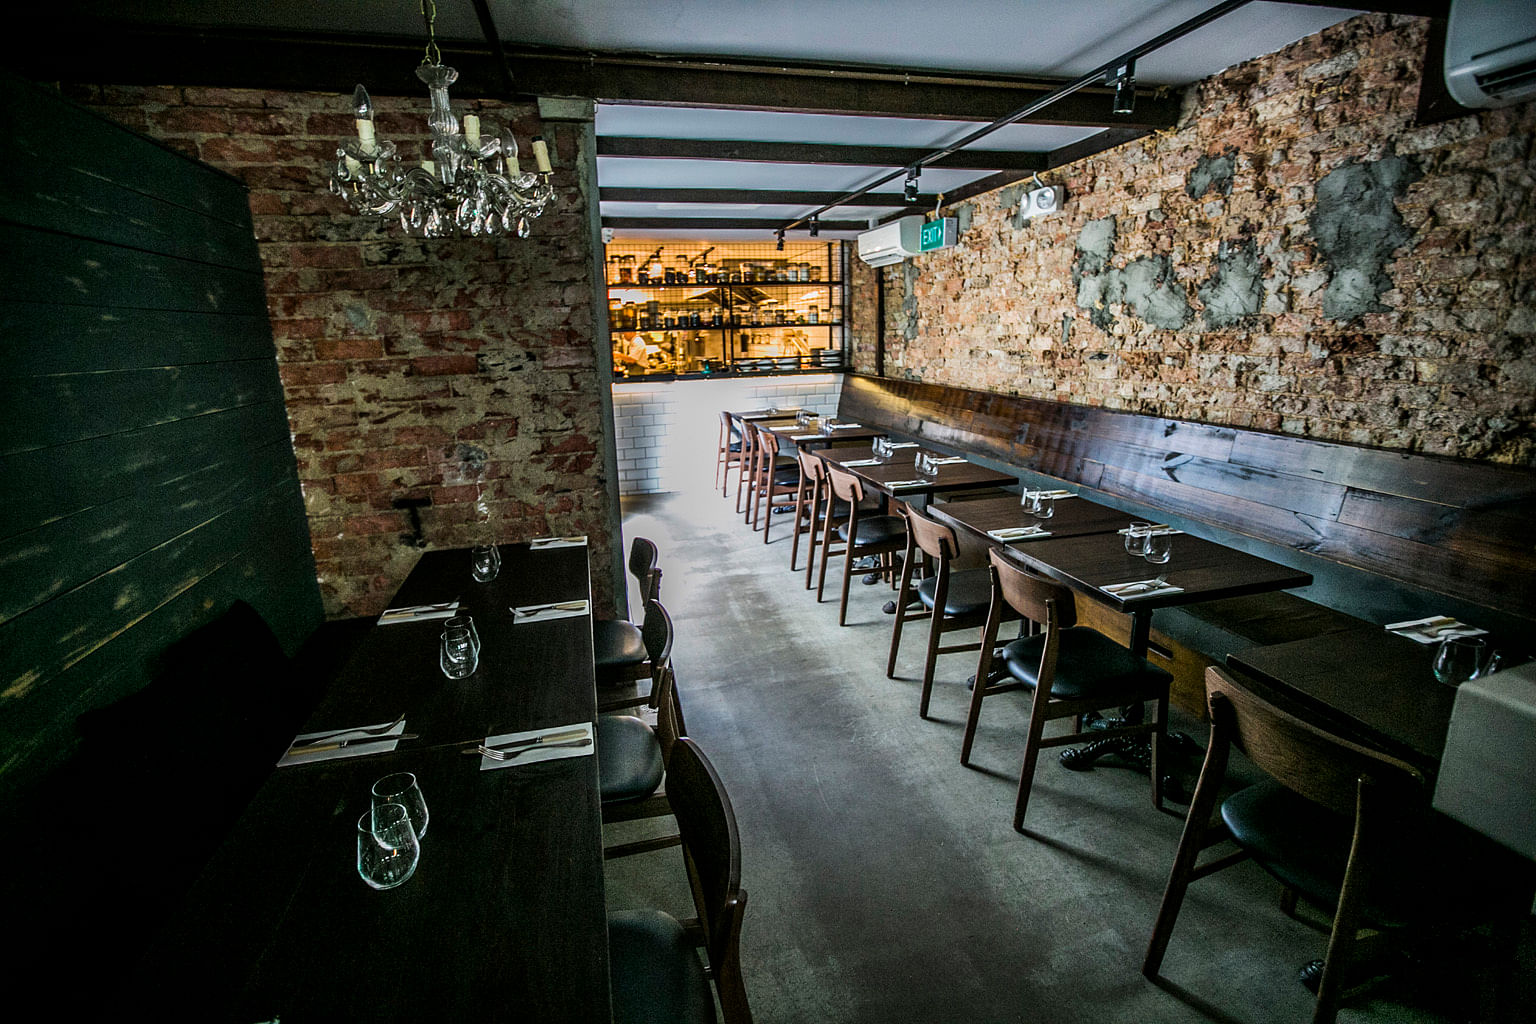 The Lo & Behold Group said the reopening of its upmarket Western restaurant The Black Swan (left) in Cecil Street will be put on hold because the Central Business District crowd will continue to remain thin for another few months as most people will 